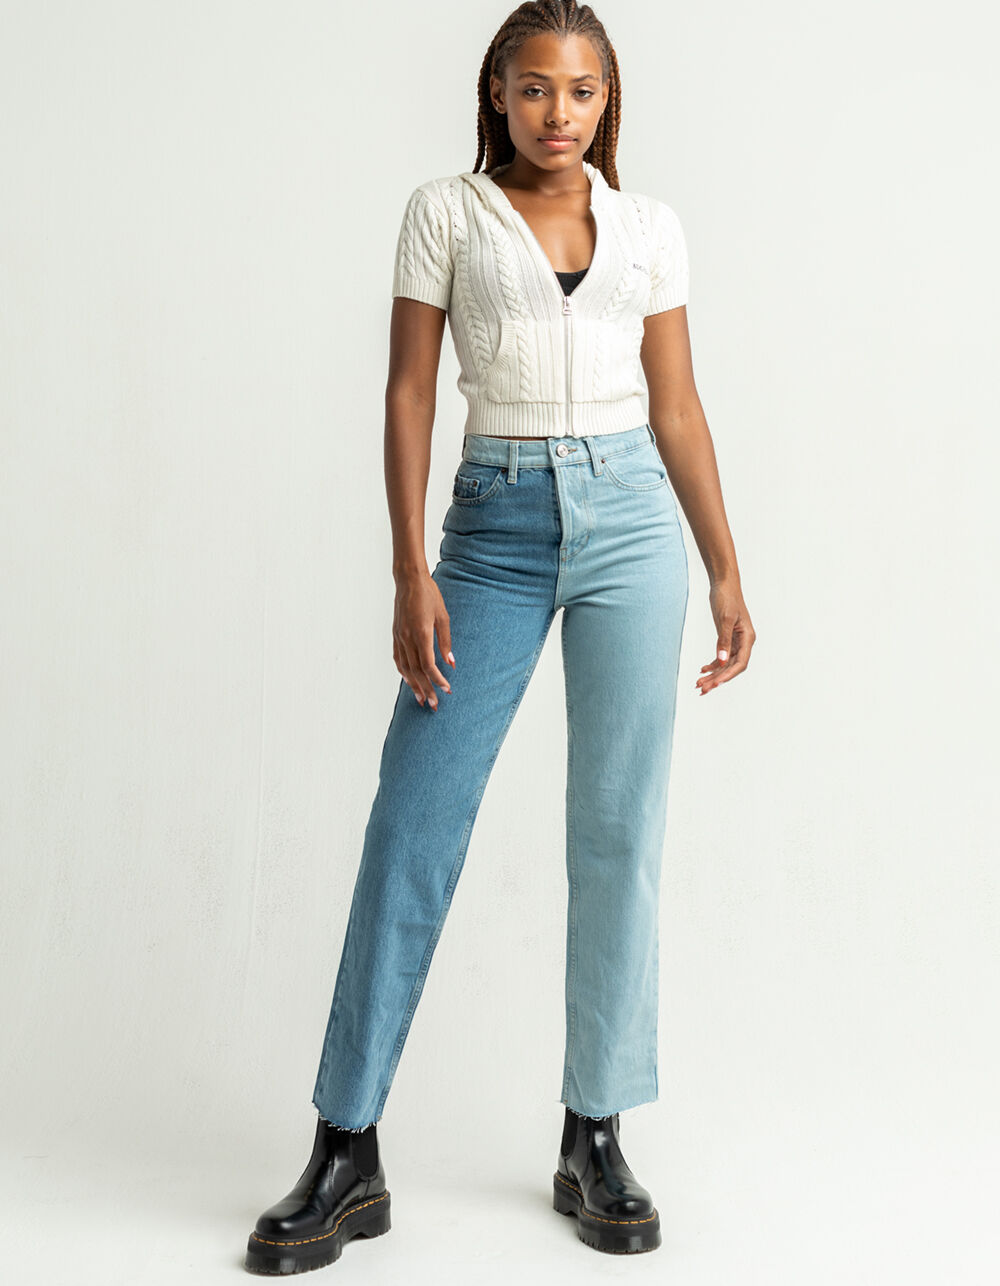 BDG Urban Outfitters 2 Tone Womens Pax Jeans - LTWSH | Tillys